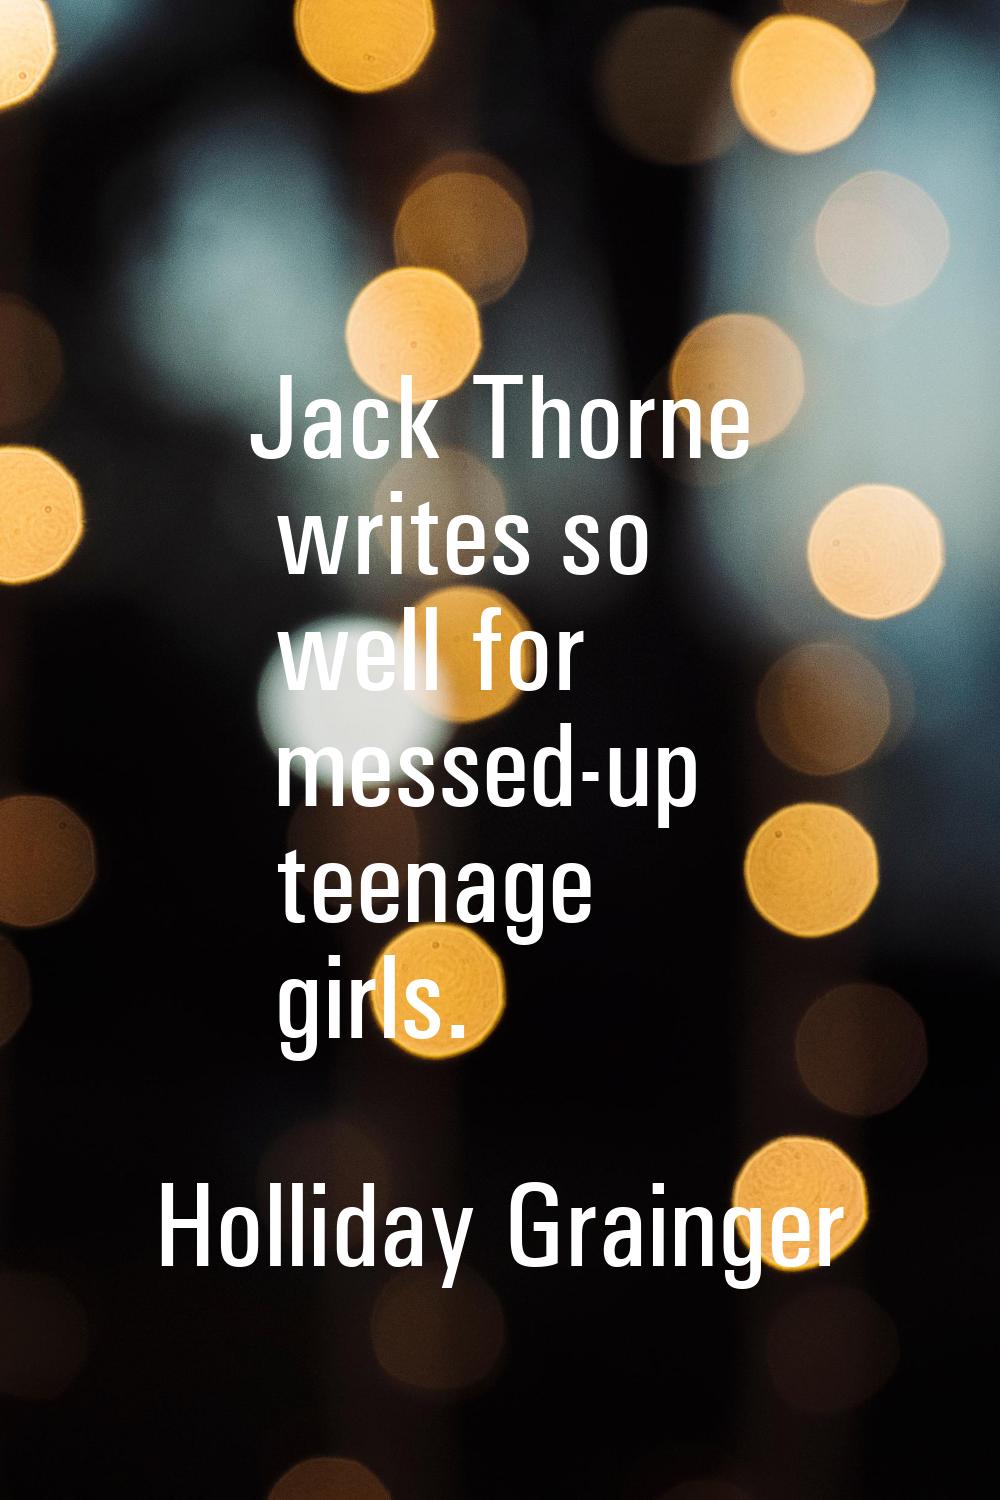 Jack Thorne writes so well for messed-up teenage girls.